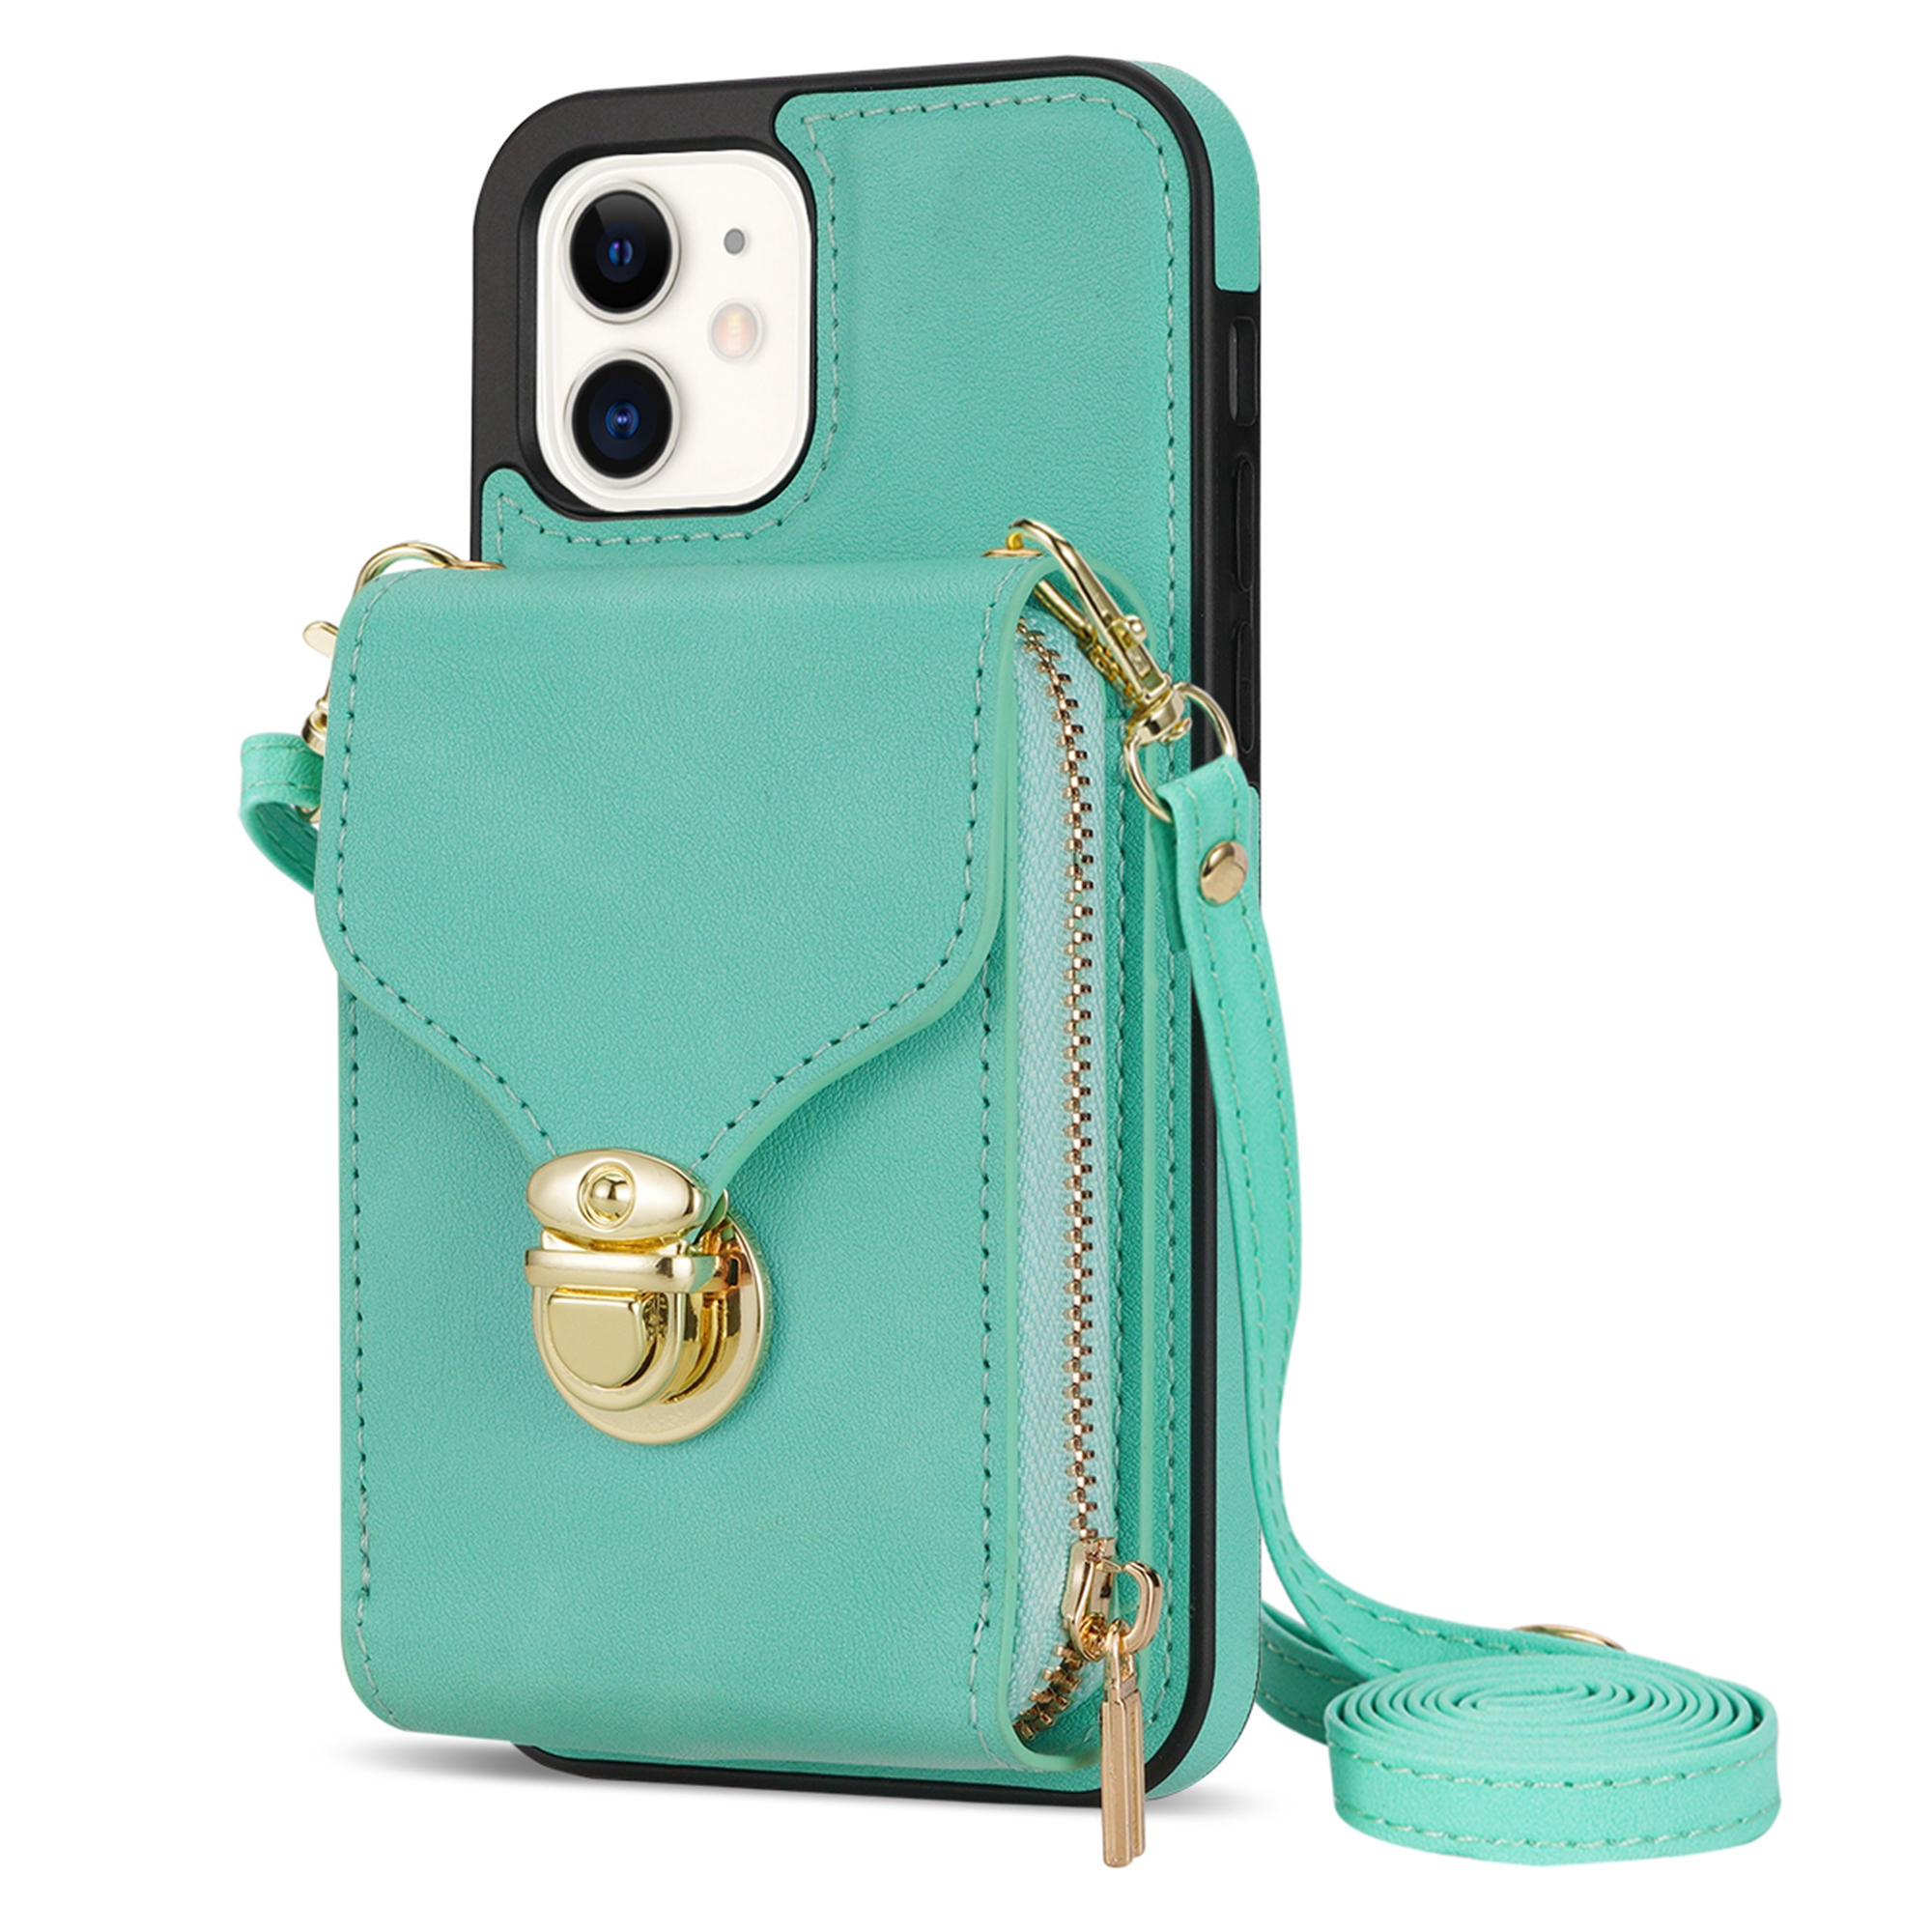 Dteck Wallet Case For iPhone 11, Crossbody Zipper Wallet Case with Credit Card Holder Slot Purse Leather Protective Case Cover For Apple iPhone 11 6.1 inch 2019, Mint - image 1 of 7